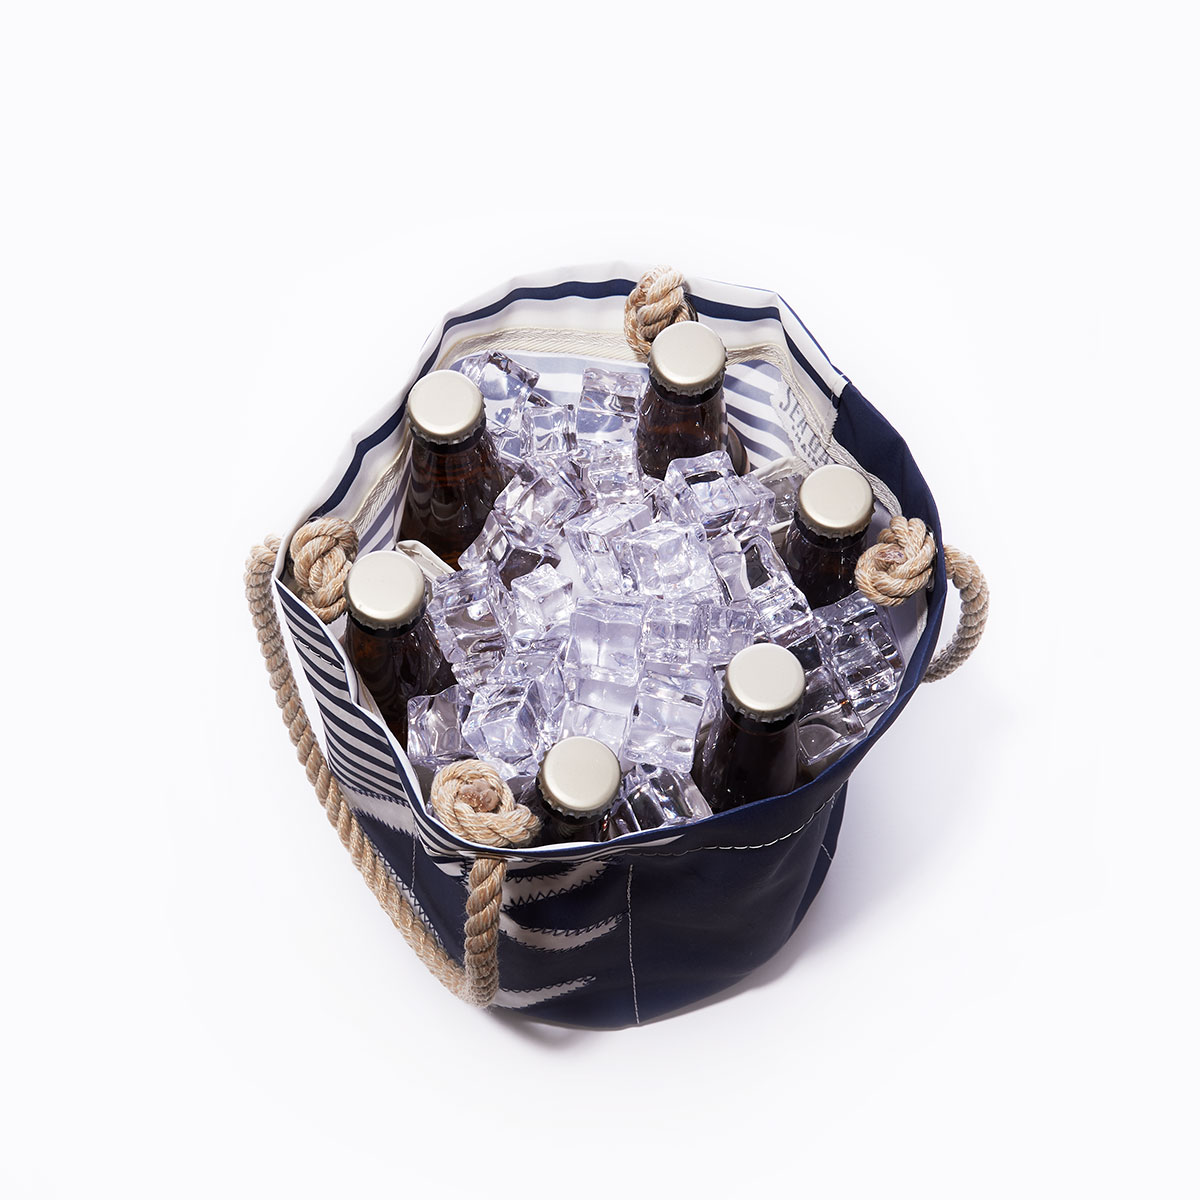 inside view with bottles and ice: the breton stripe white anchor beverage bucket is embellished with a white anchor in front of a solid navy bottom corner and a navy and white striped top corner and navy rope handles